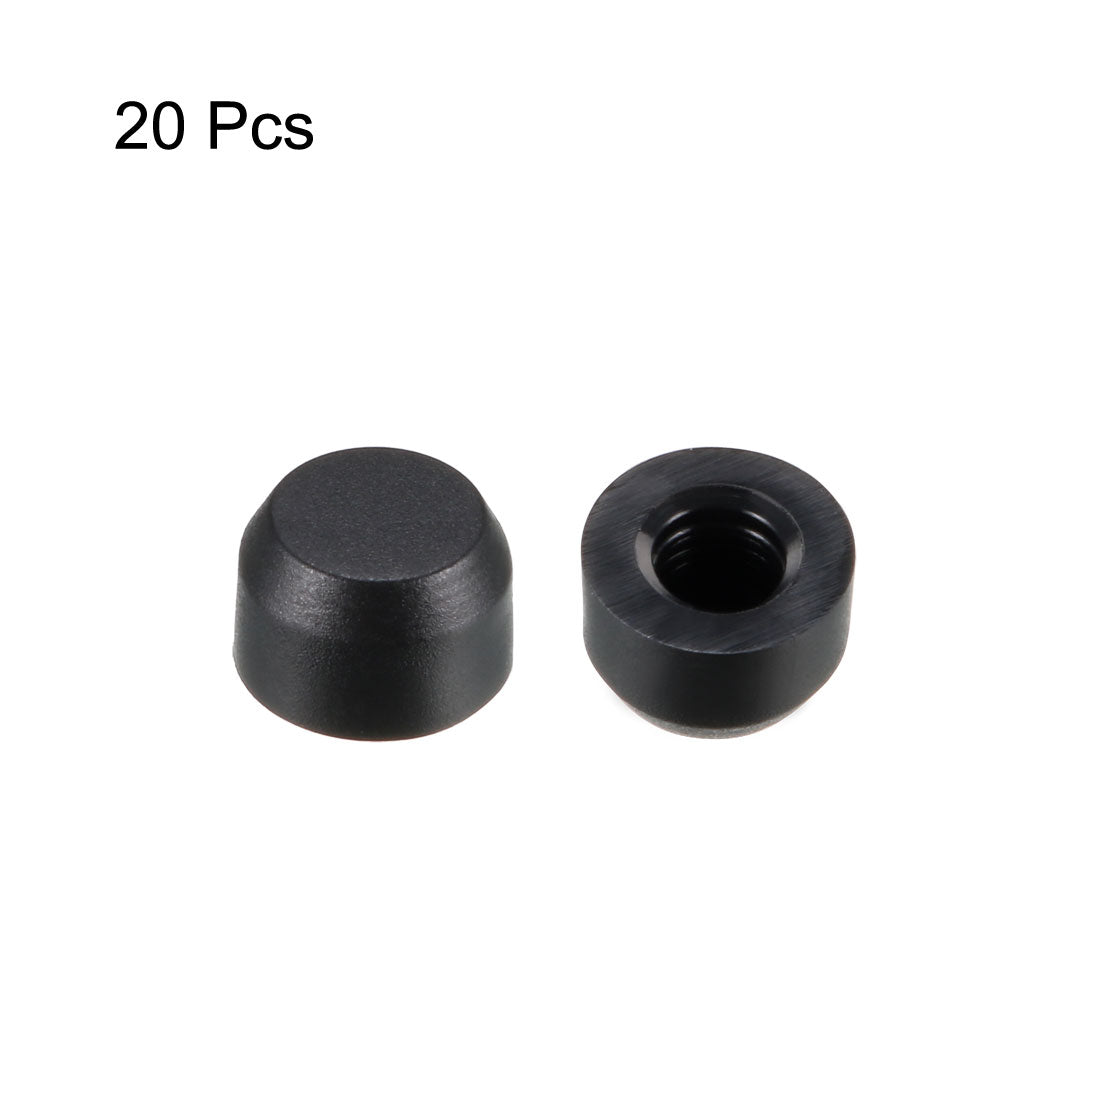 uxcell Uxcell 20pcs 3mm Hole Dia Silica-gel Pushbutton Tactile Switch Caps Cover Keycaps Protector Black for 6x6 Tact Switch